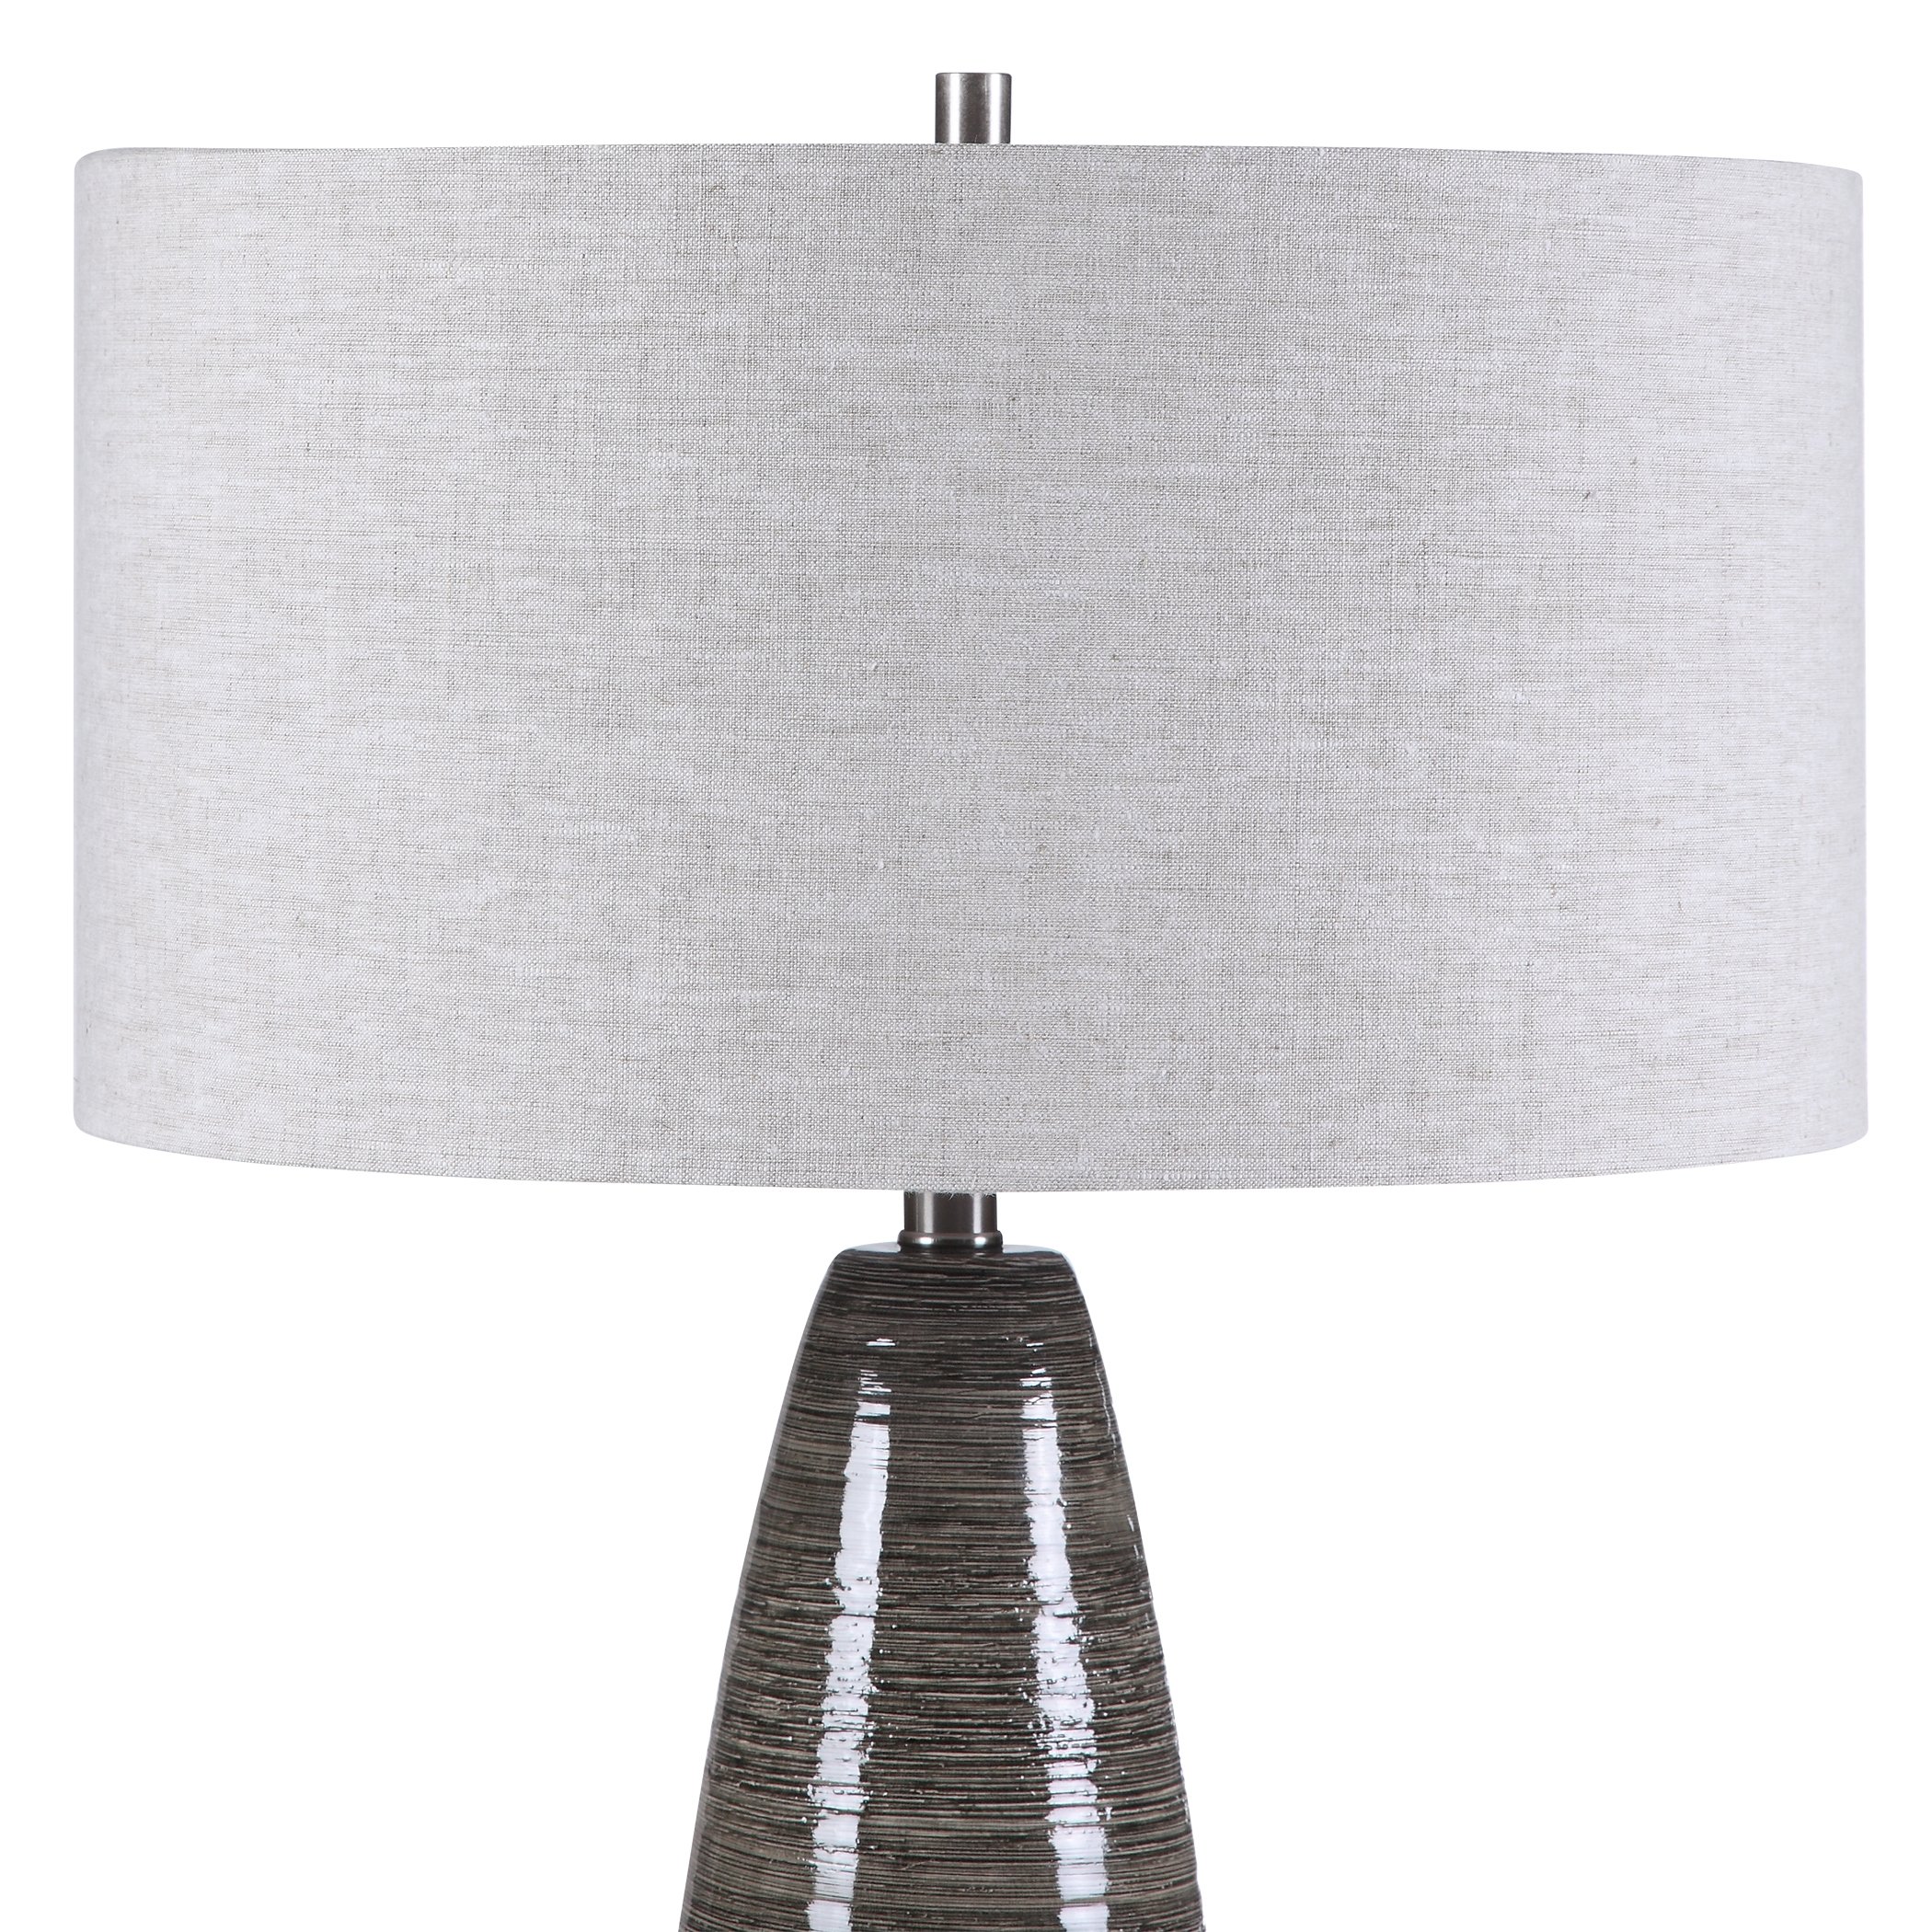 Cosmo Charcoal Table Lamp - Image 3